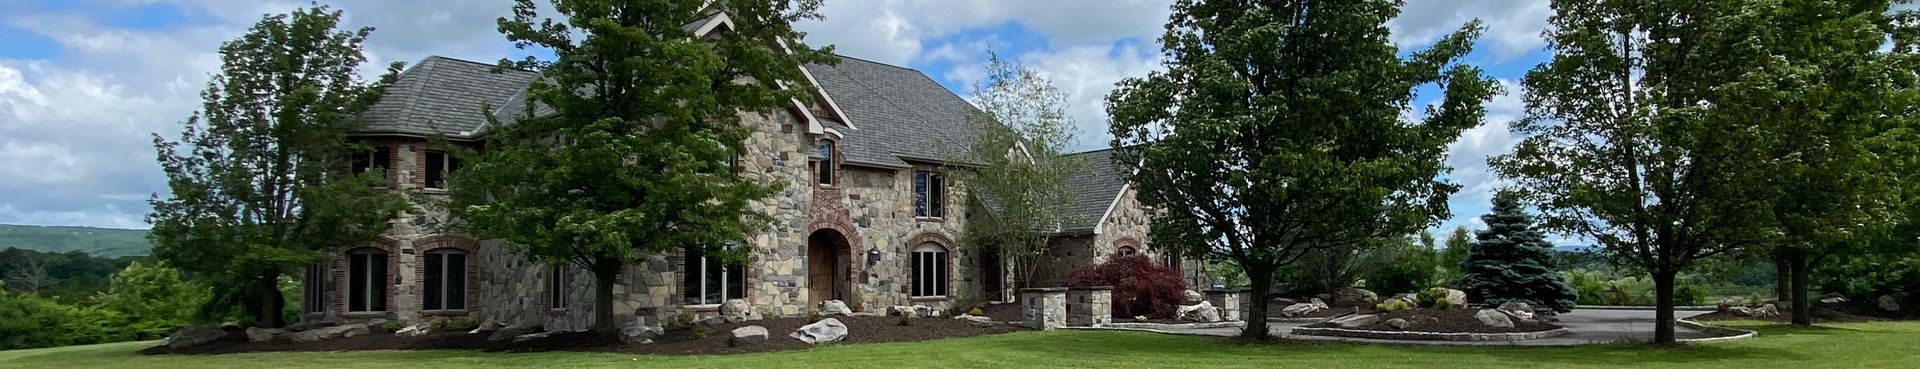 Panorama image of Chestnuthill Countryside Manor in the Poconos